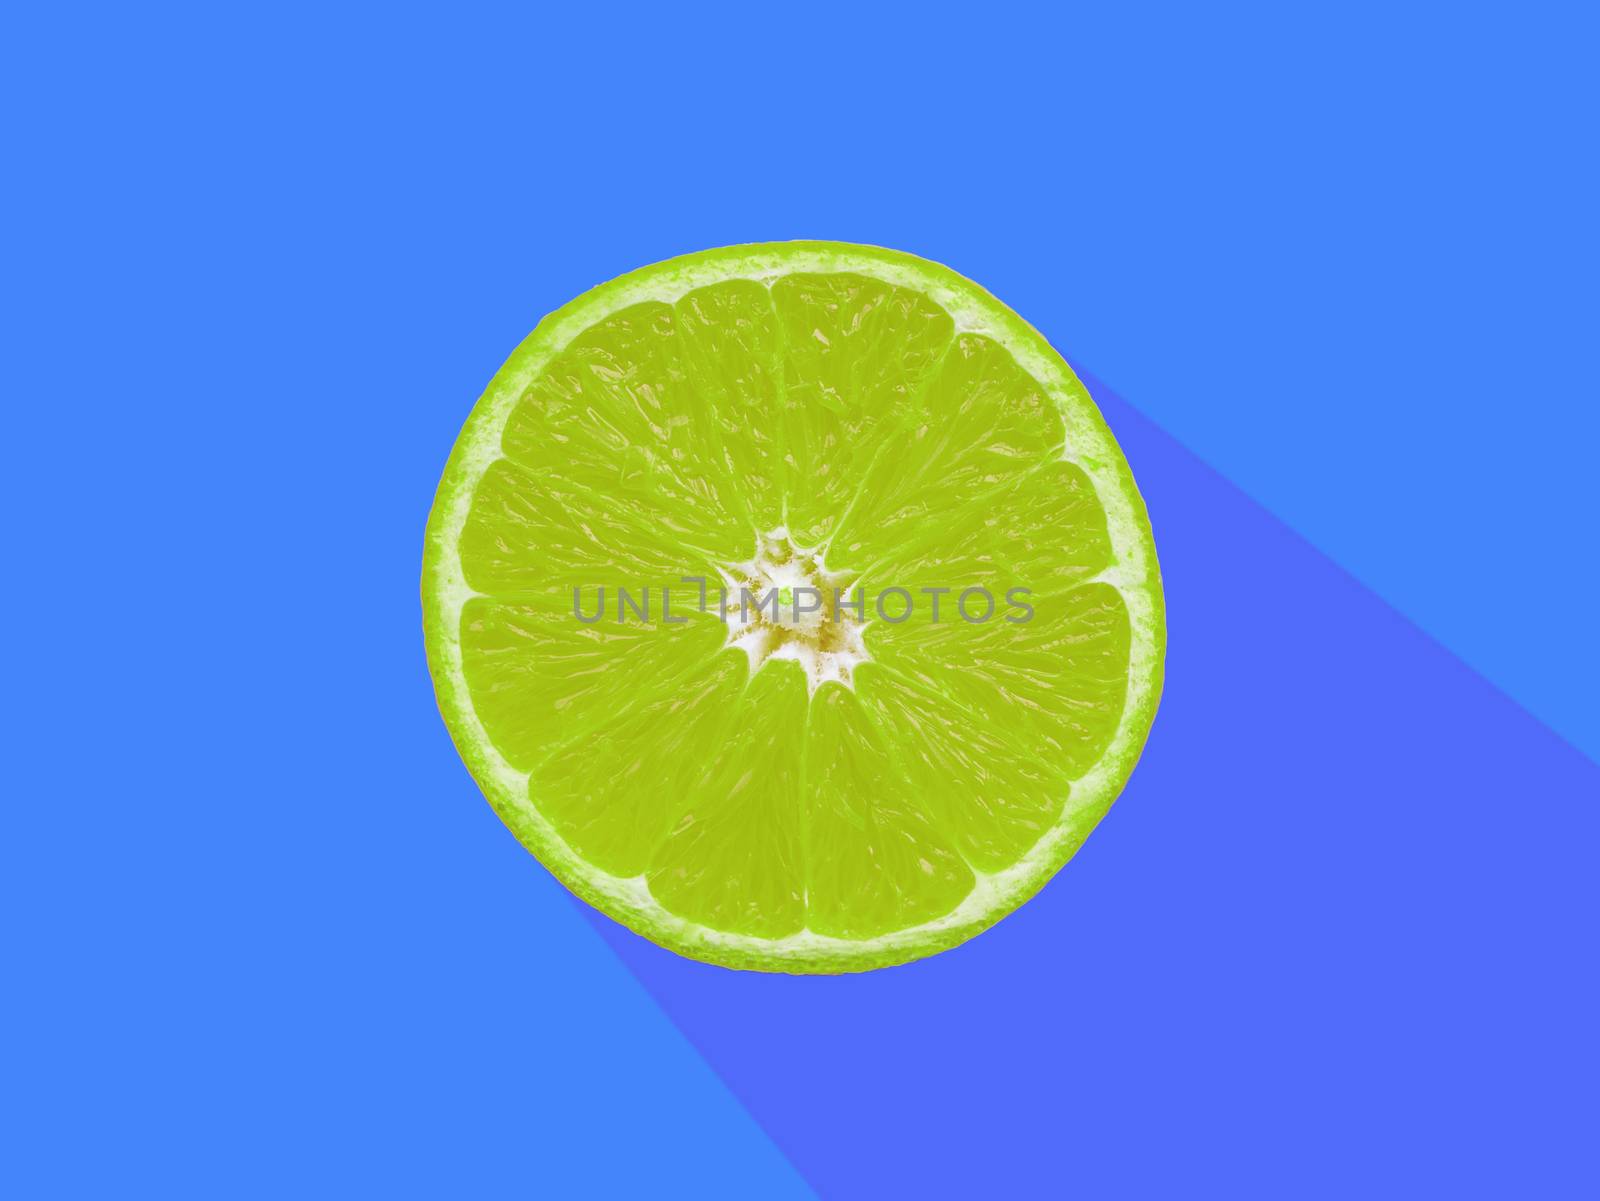 abstract pattern background : Green lime slices on blue background, pop art style by asiandelight